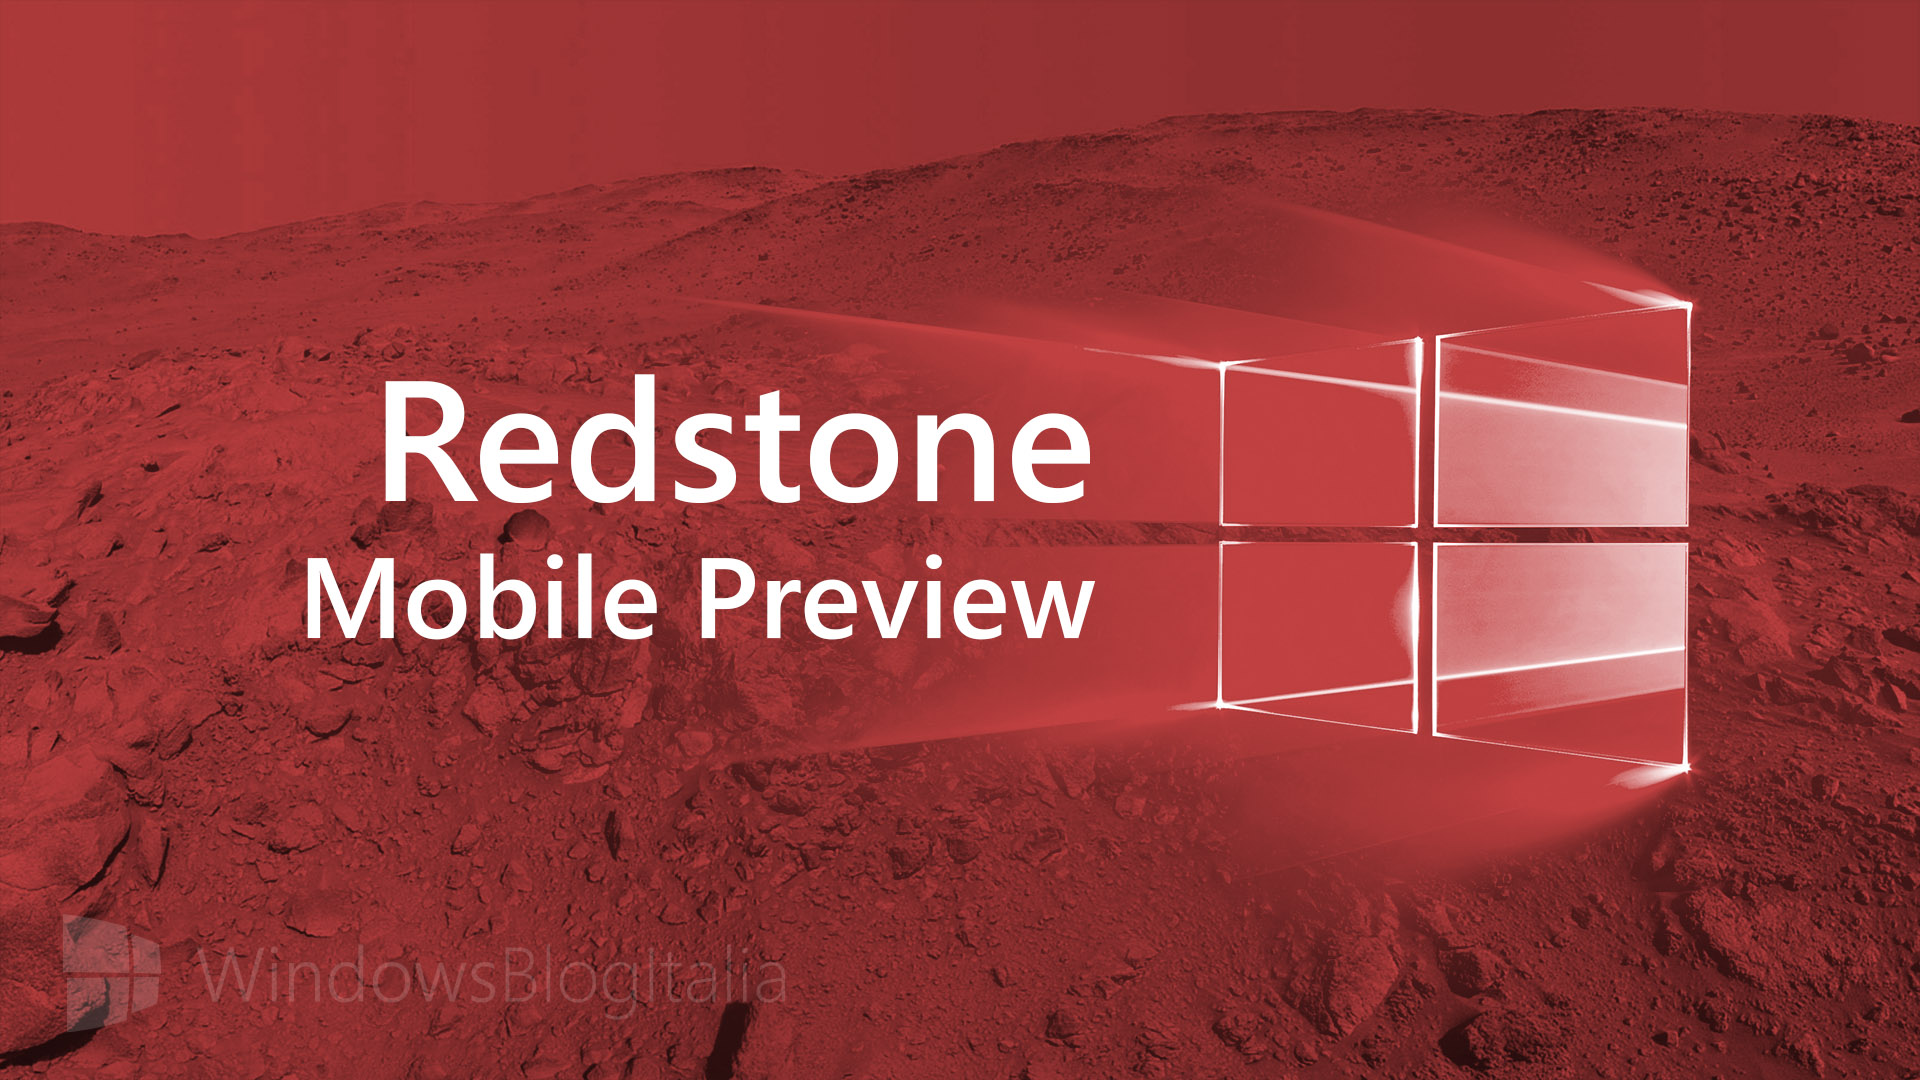 Redstone Mobile Preview